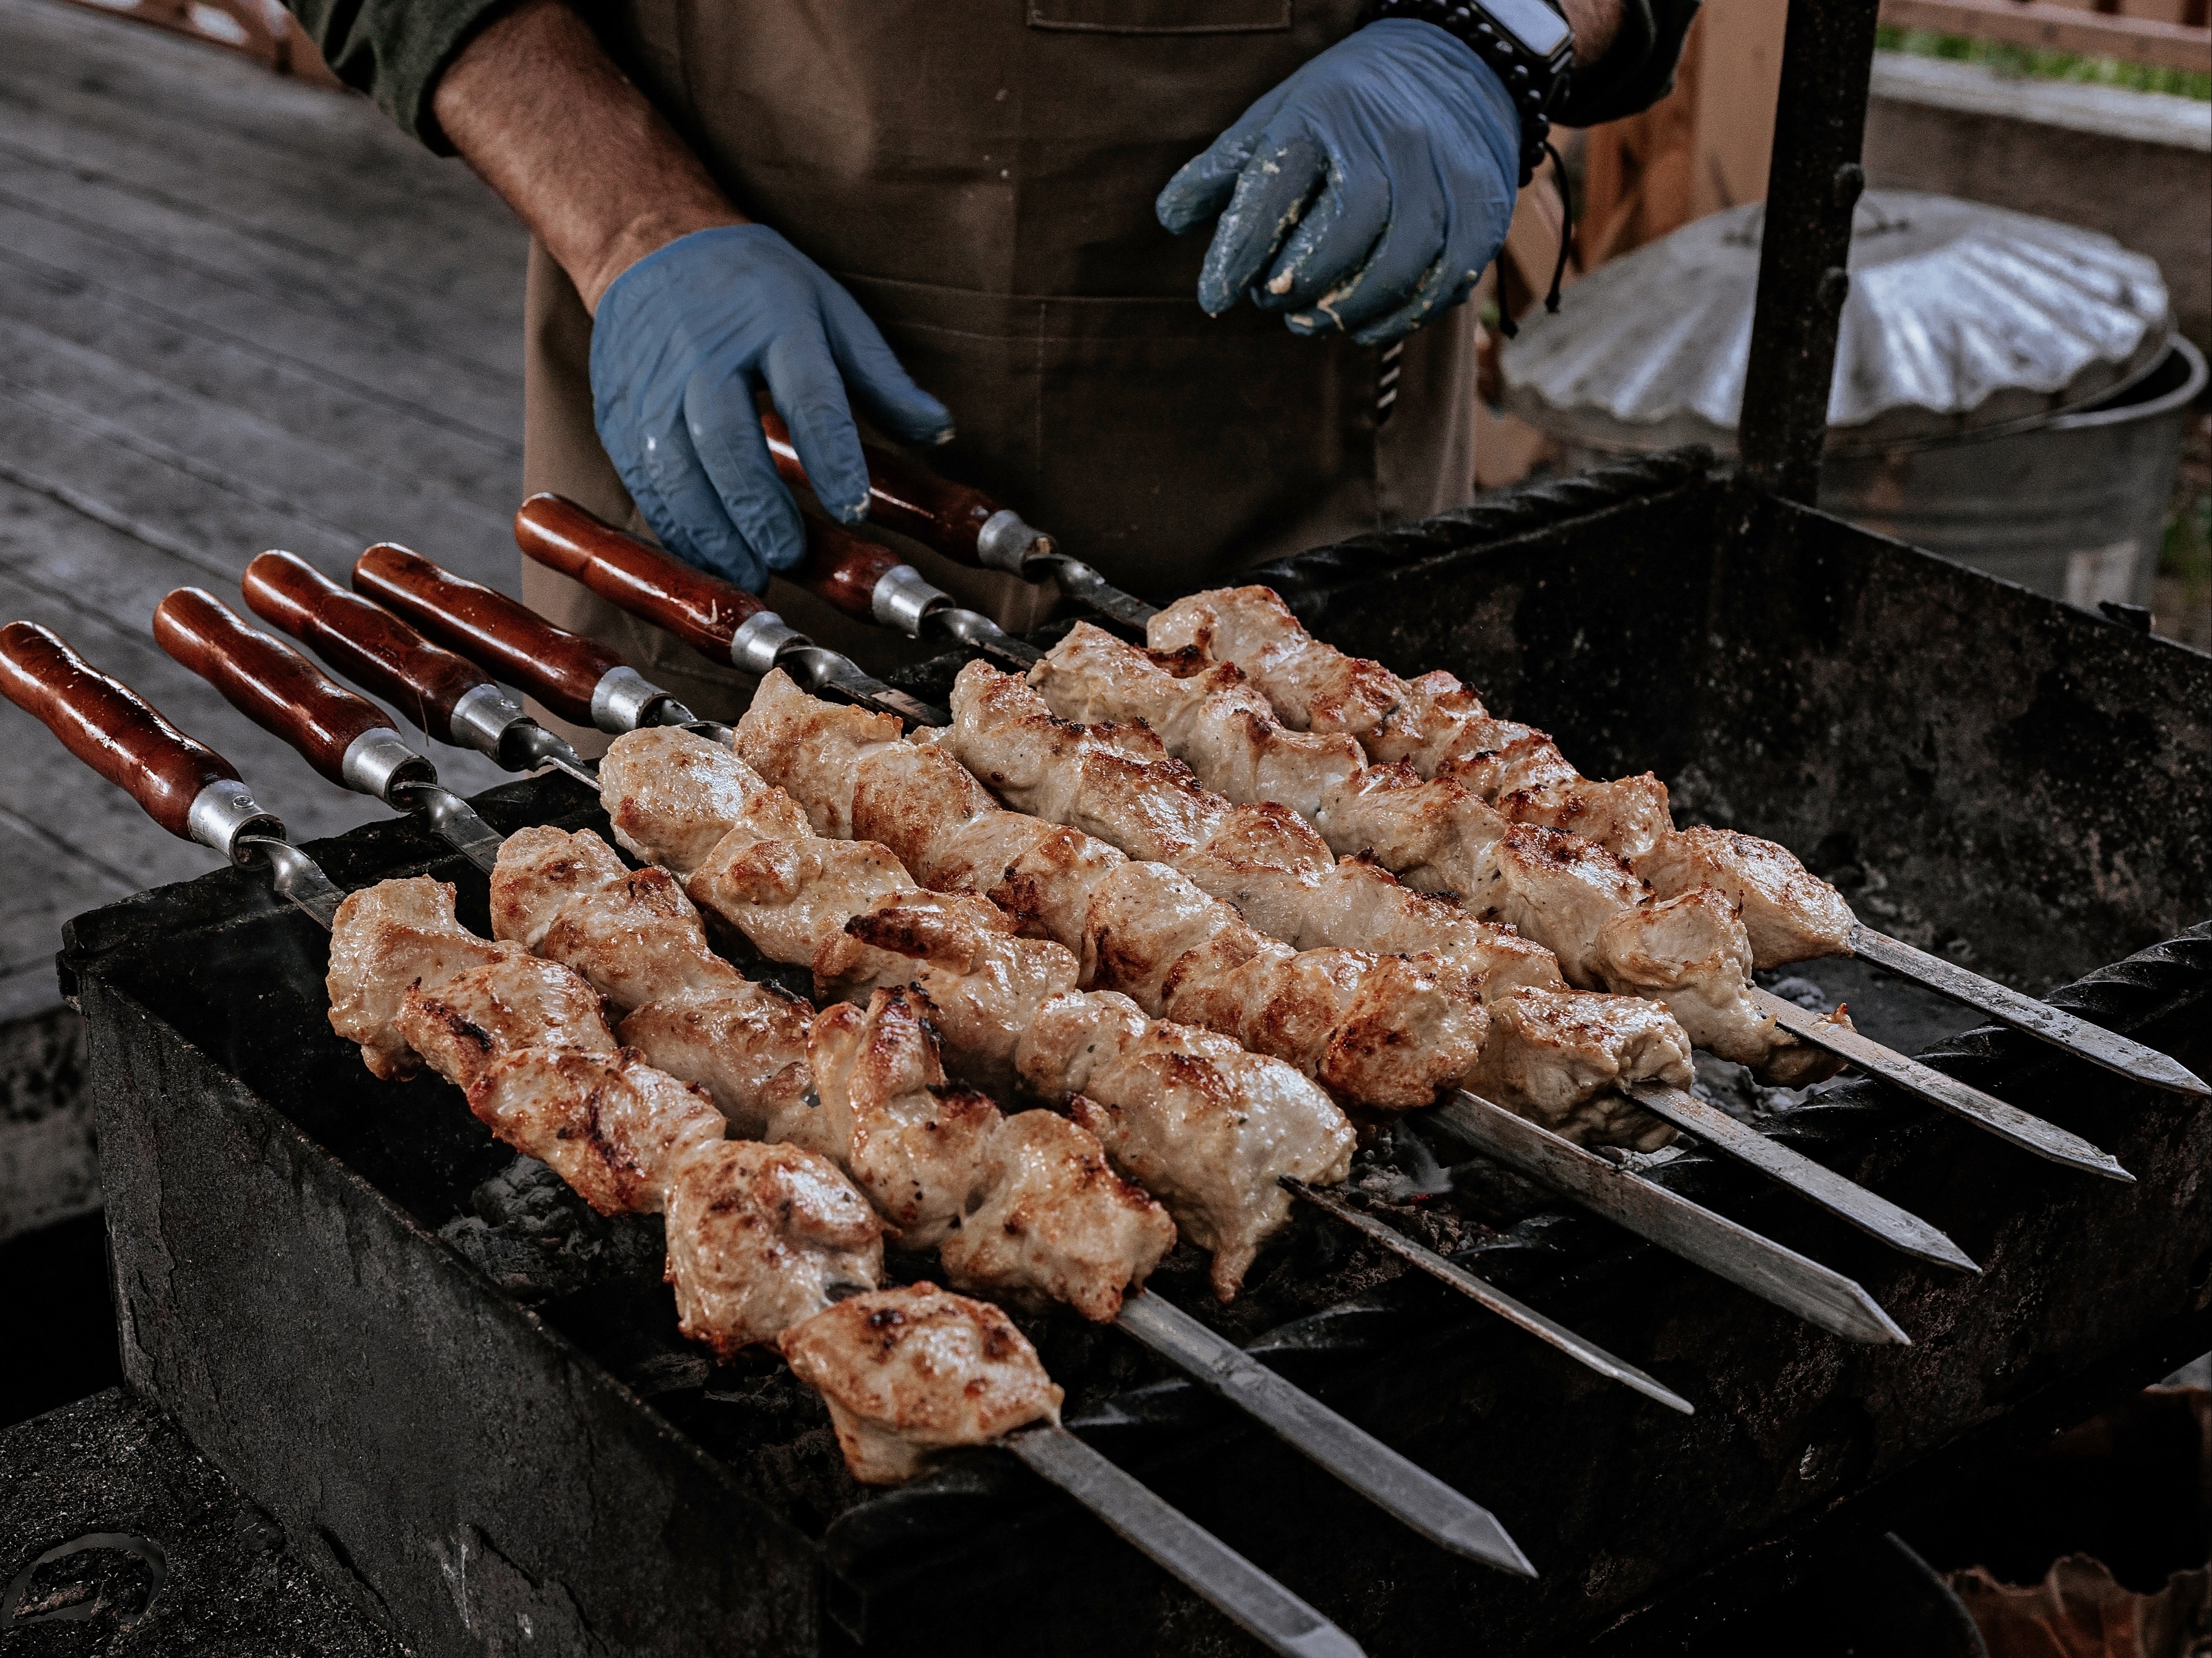 How to cook just about anything on a skewer